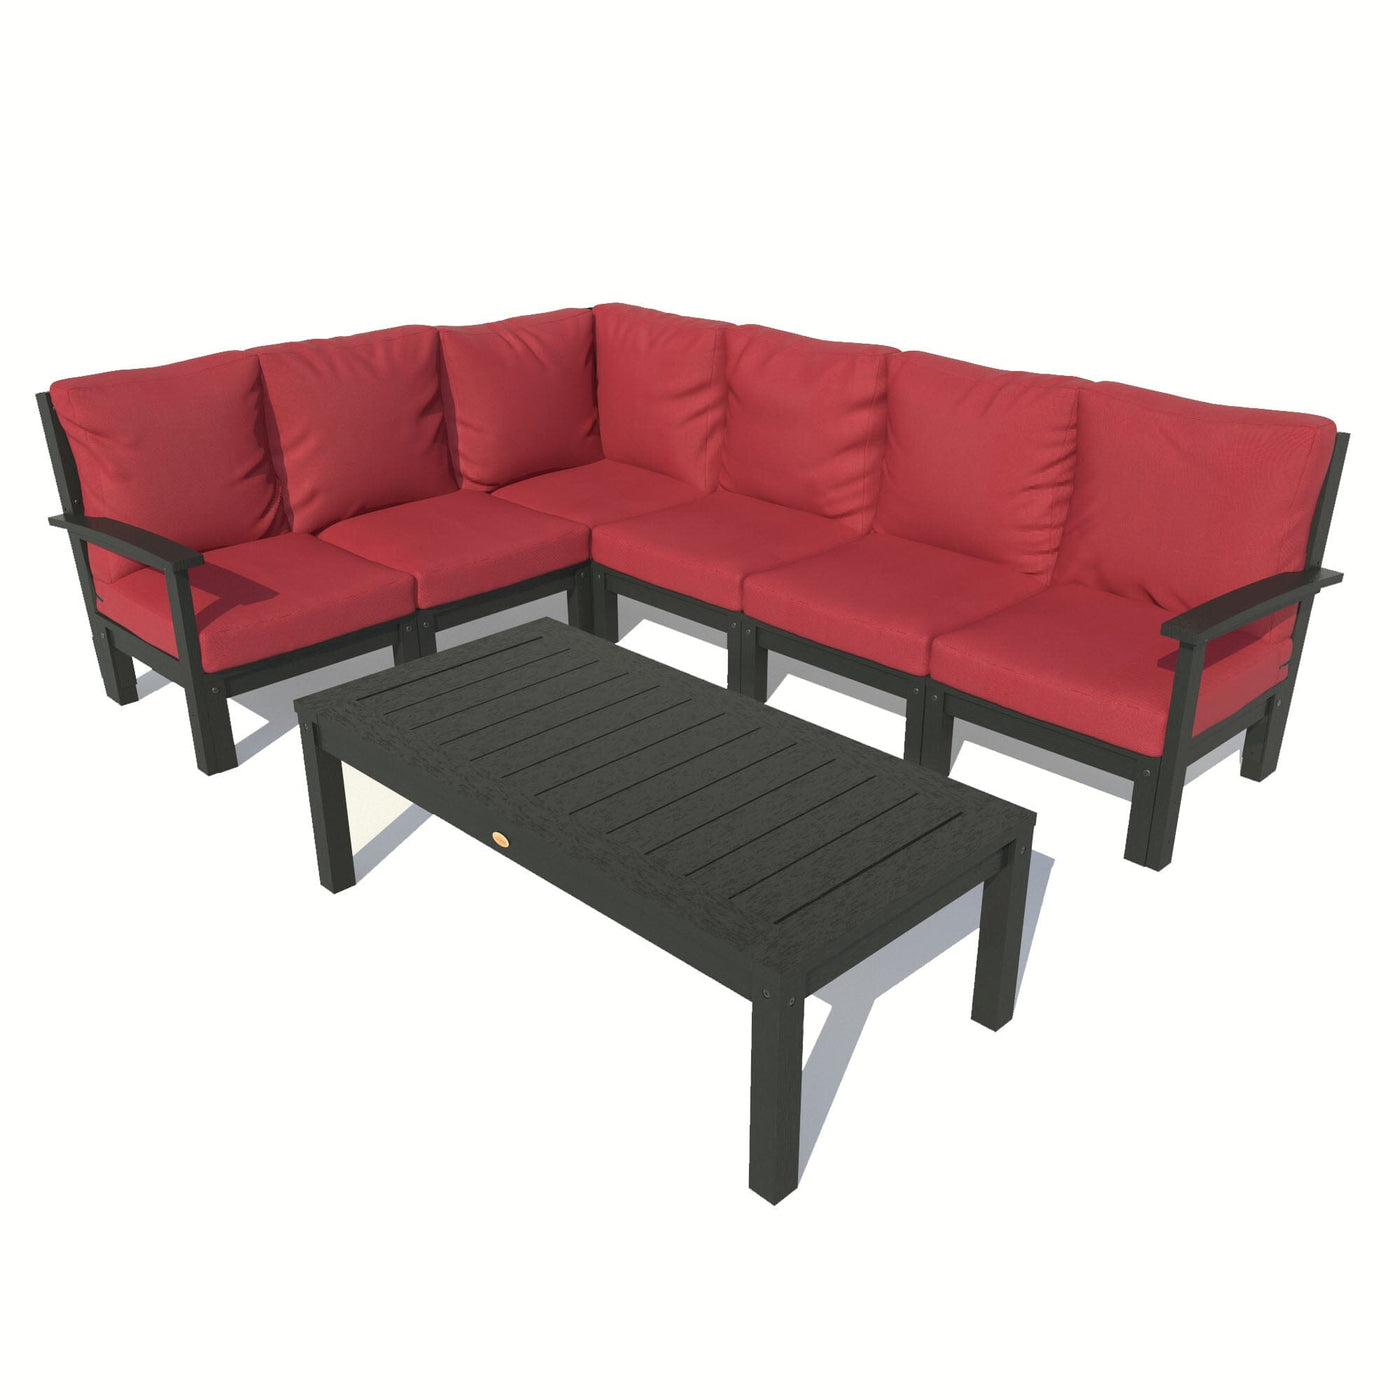 Bespoke Deep Seating: 7 Piece Sectional Sofa Set with Conversation Table Deep Seating Highwood USA Firecracker Red Black 